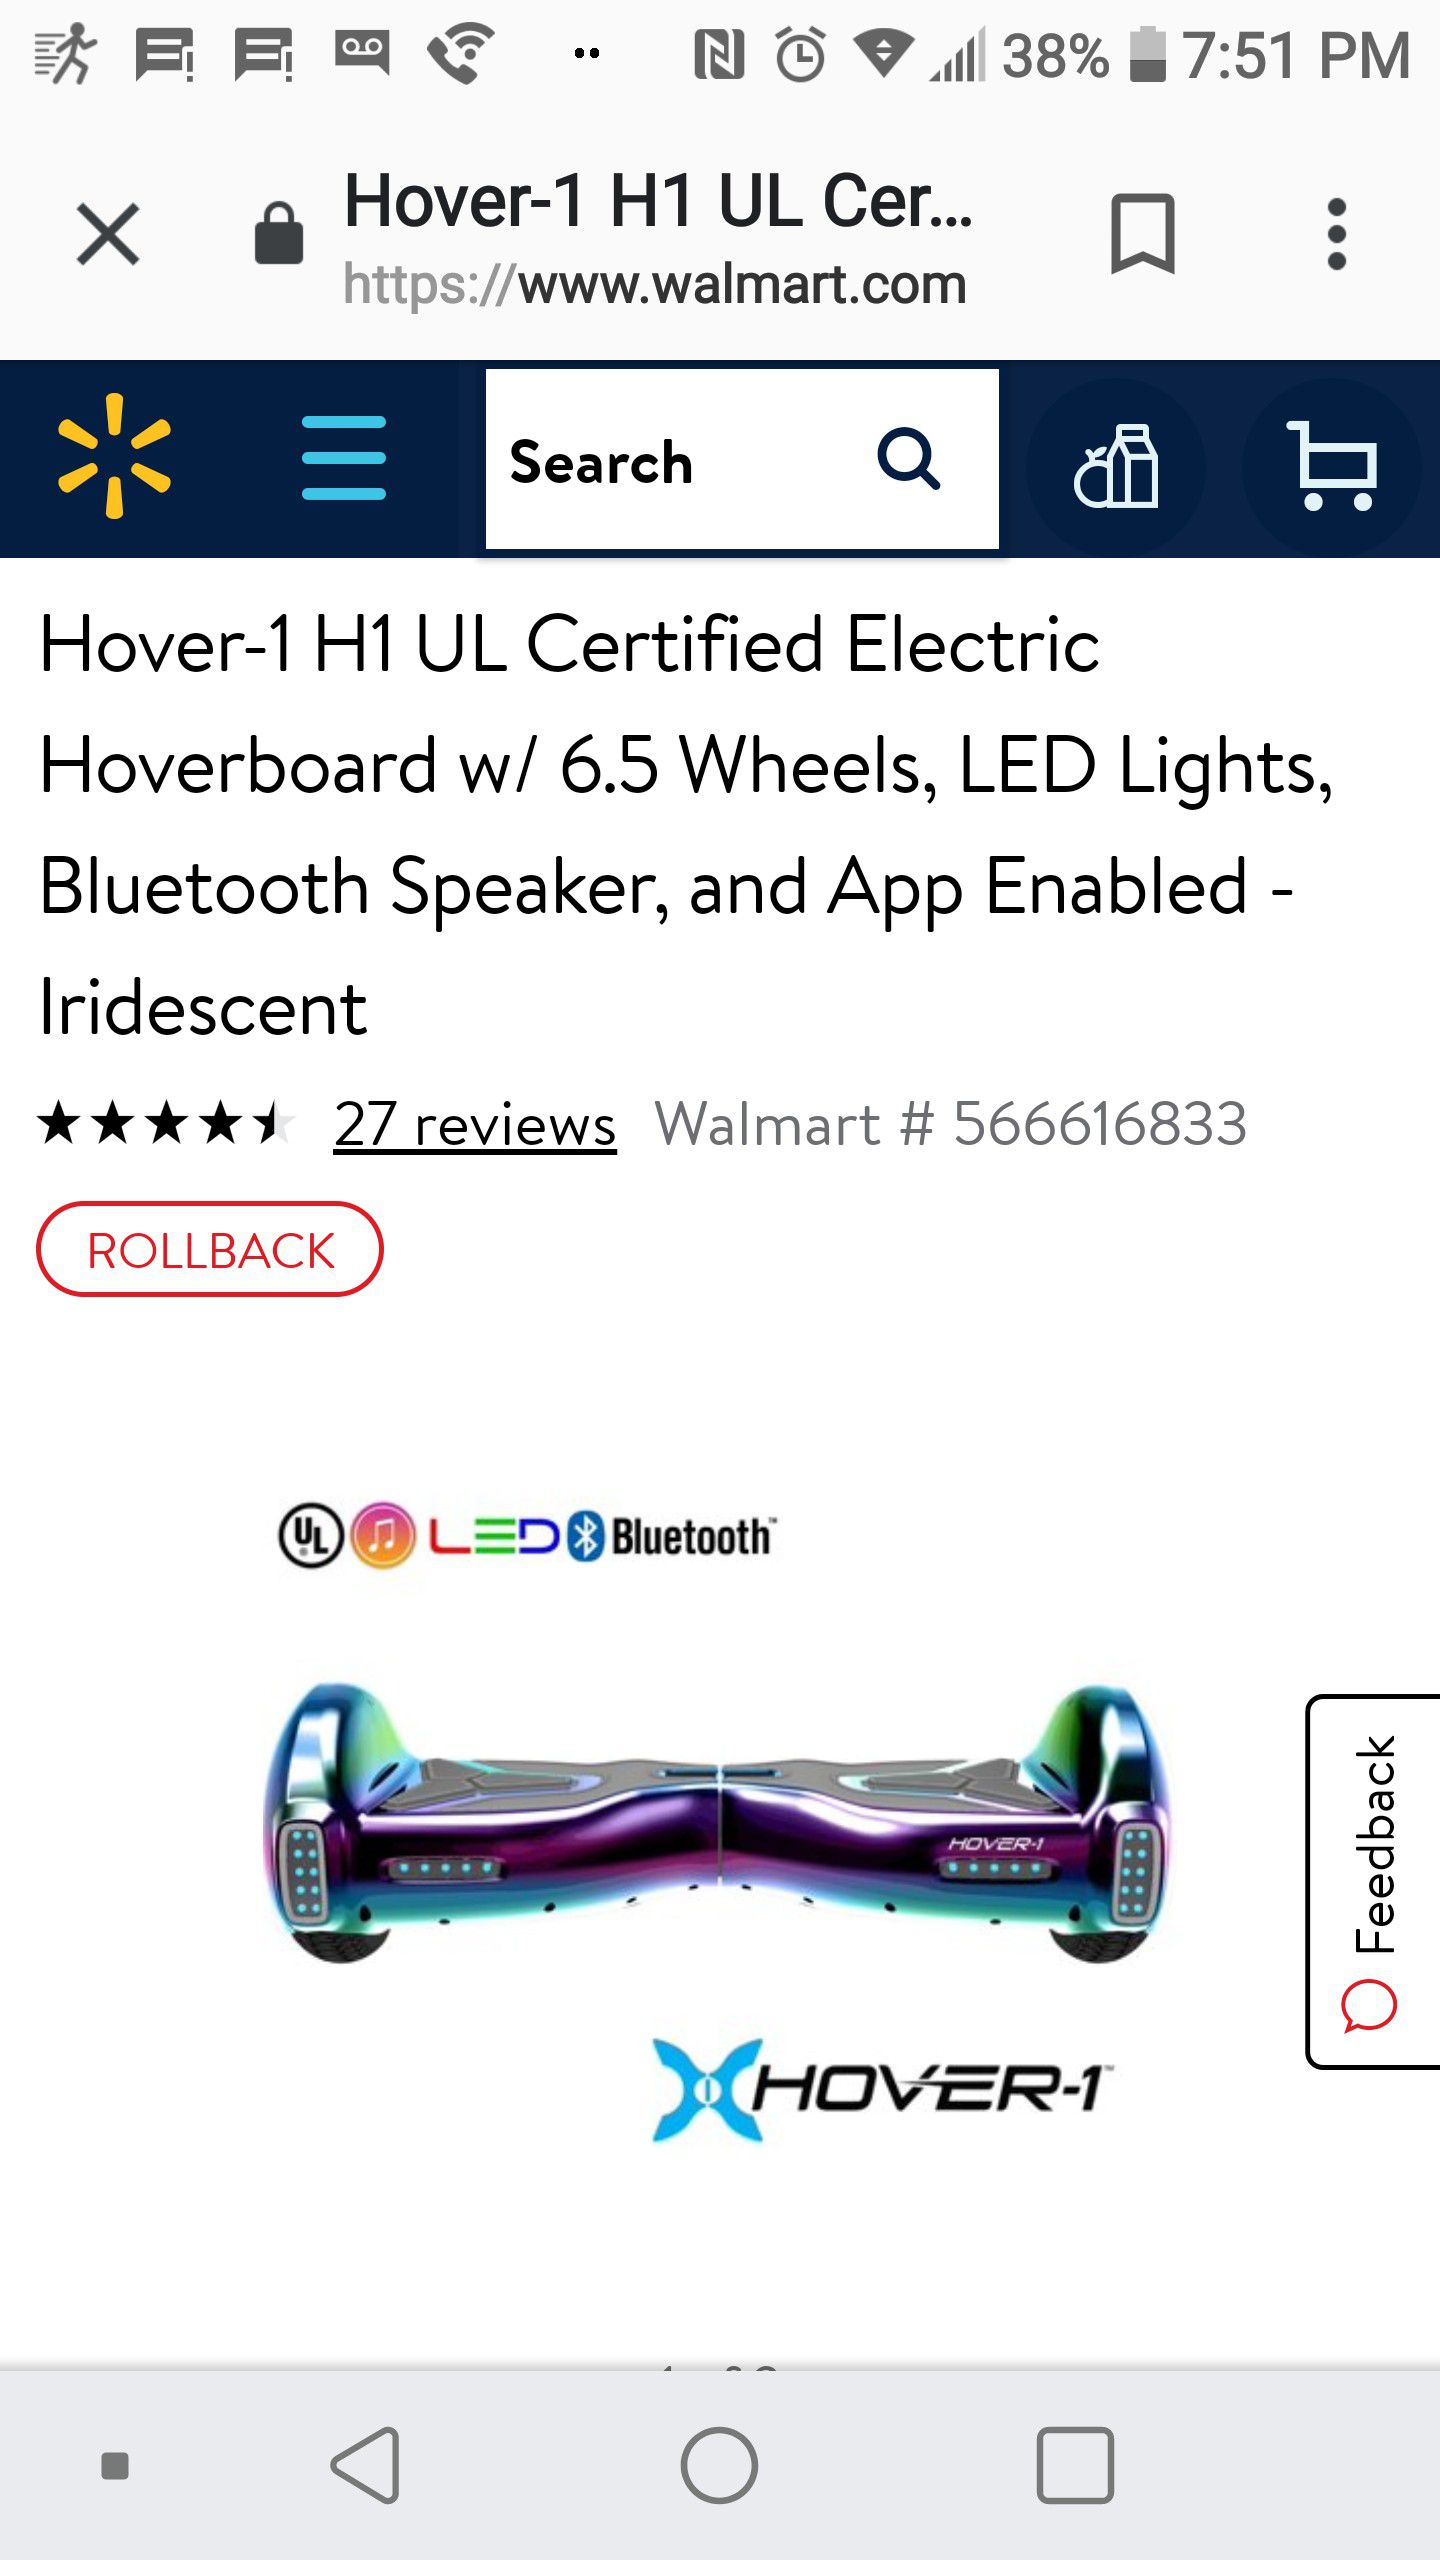 Hover-1 H1 UL Certified Electric Hoverboard w/ 6.5 Wheels, LED Lights, Bluetooth Speaker, and App Enabled -